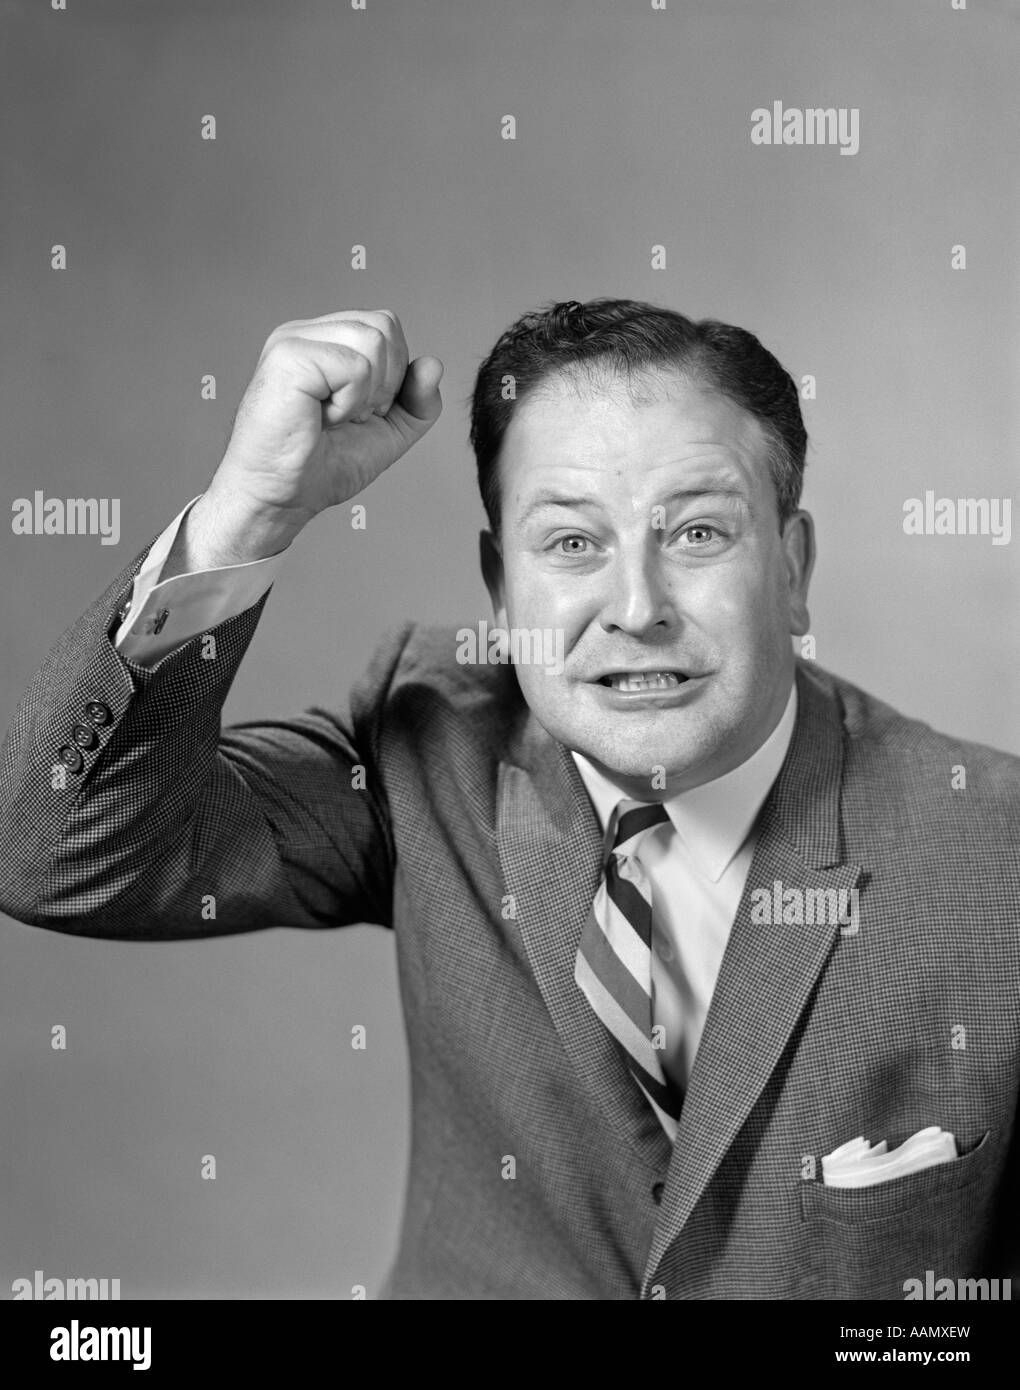 1950s EXCITED ANGRY BUSINESSMAN RAISING HIS FIST Stock Photo